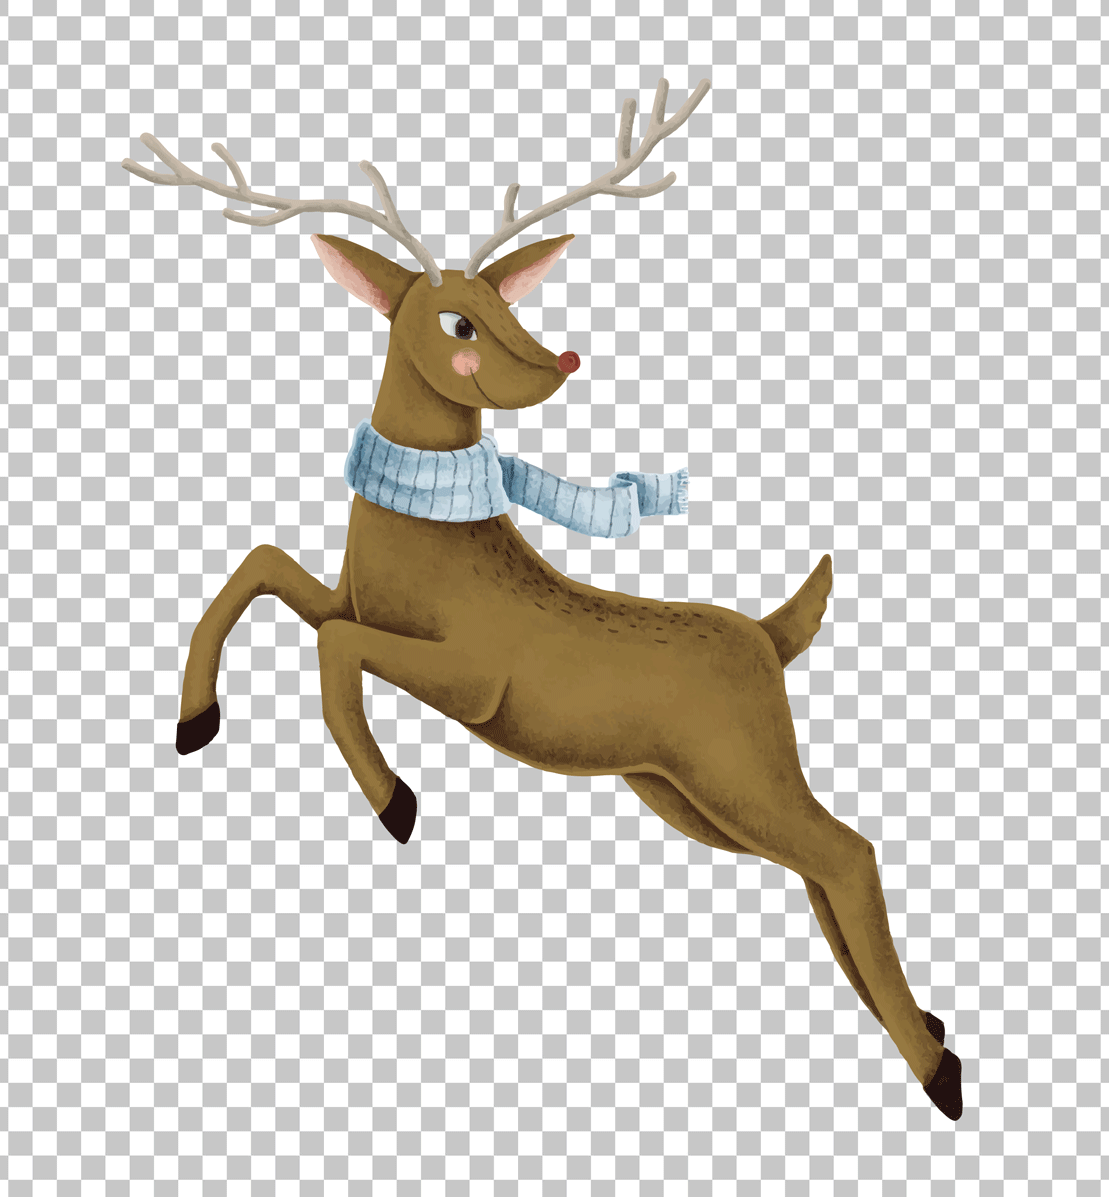 Reindeer with scarf PNG Image